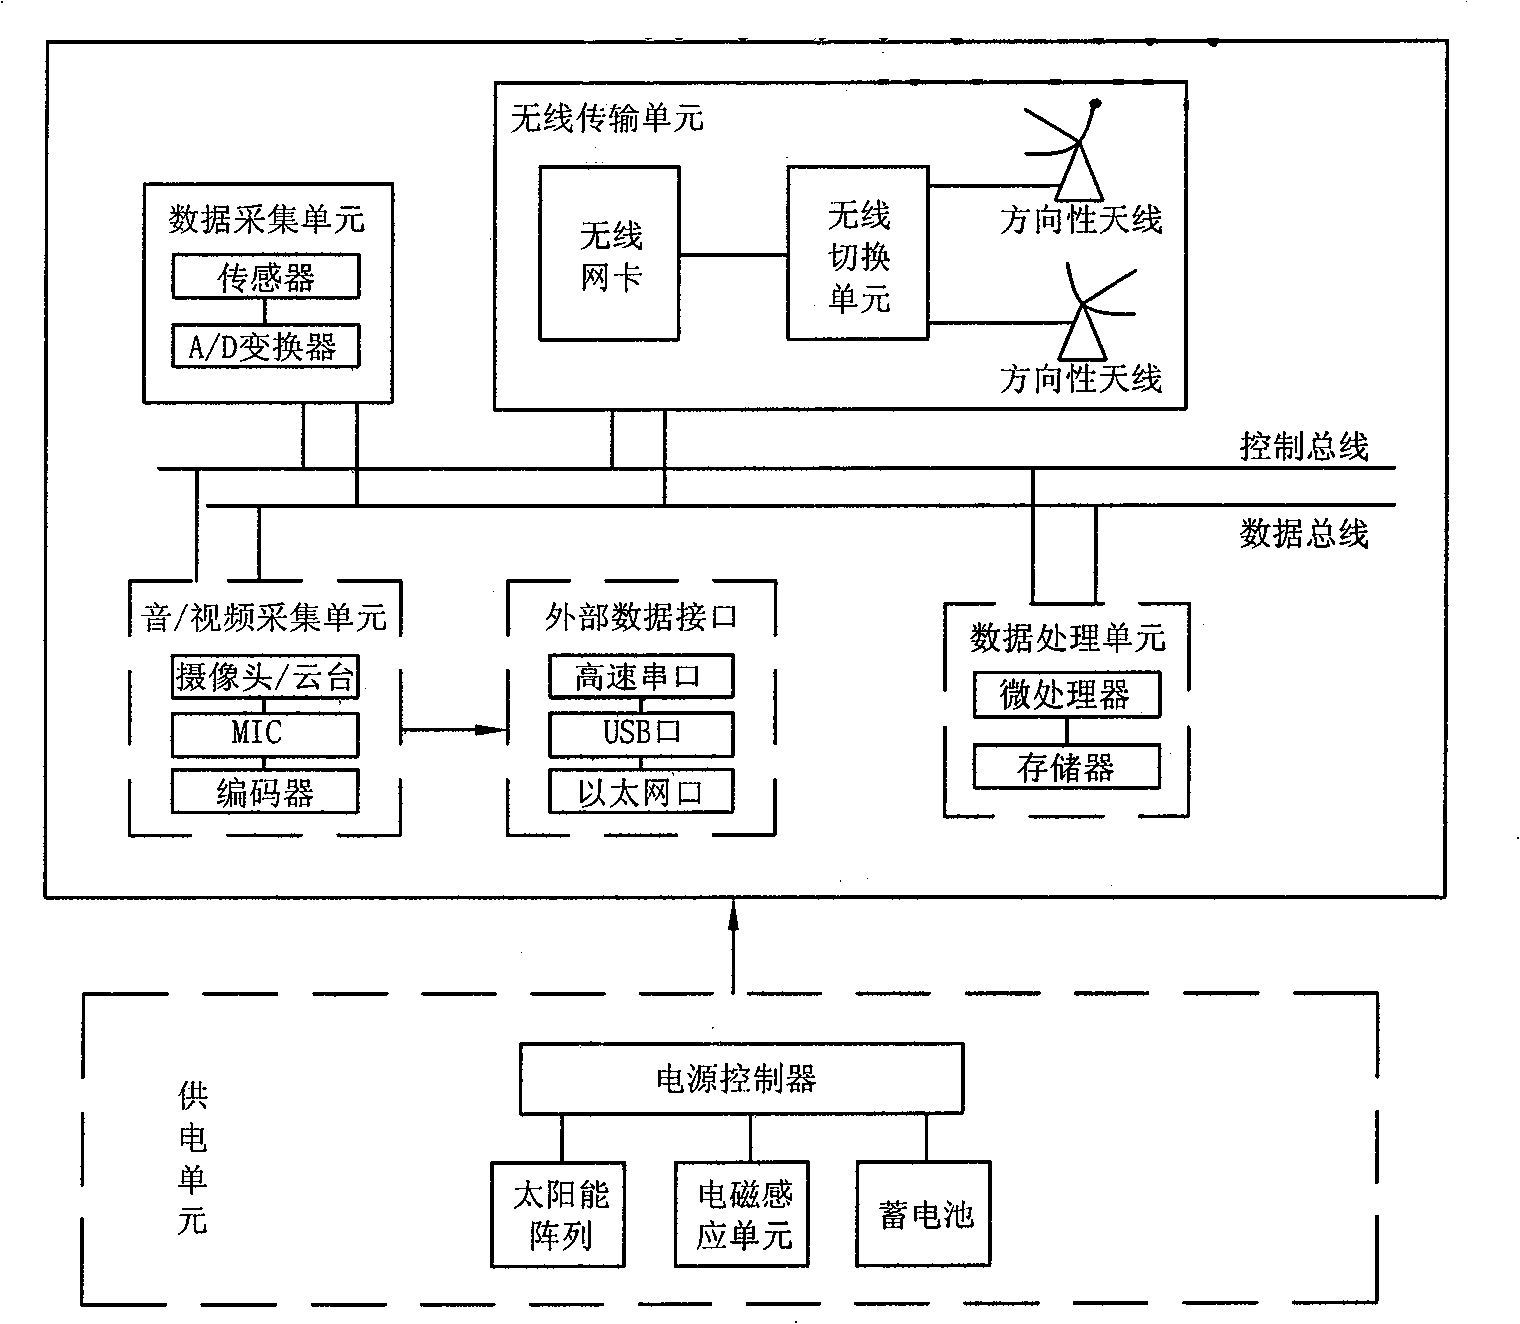 High voltage electricity transmission line monitoring method based on wireless communication and optical communication